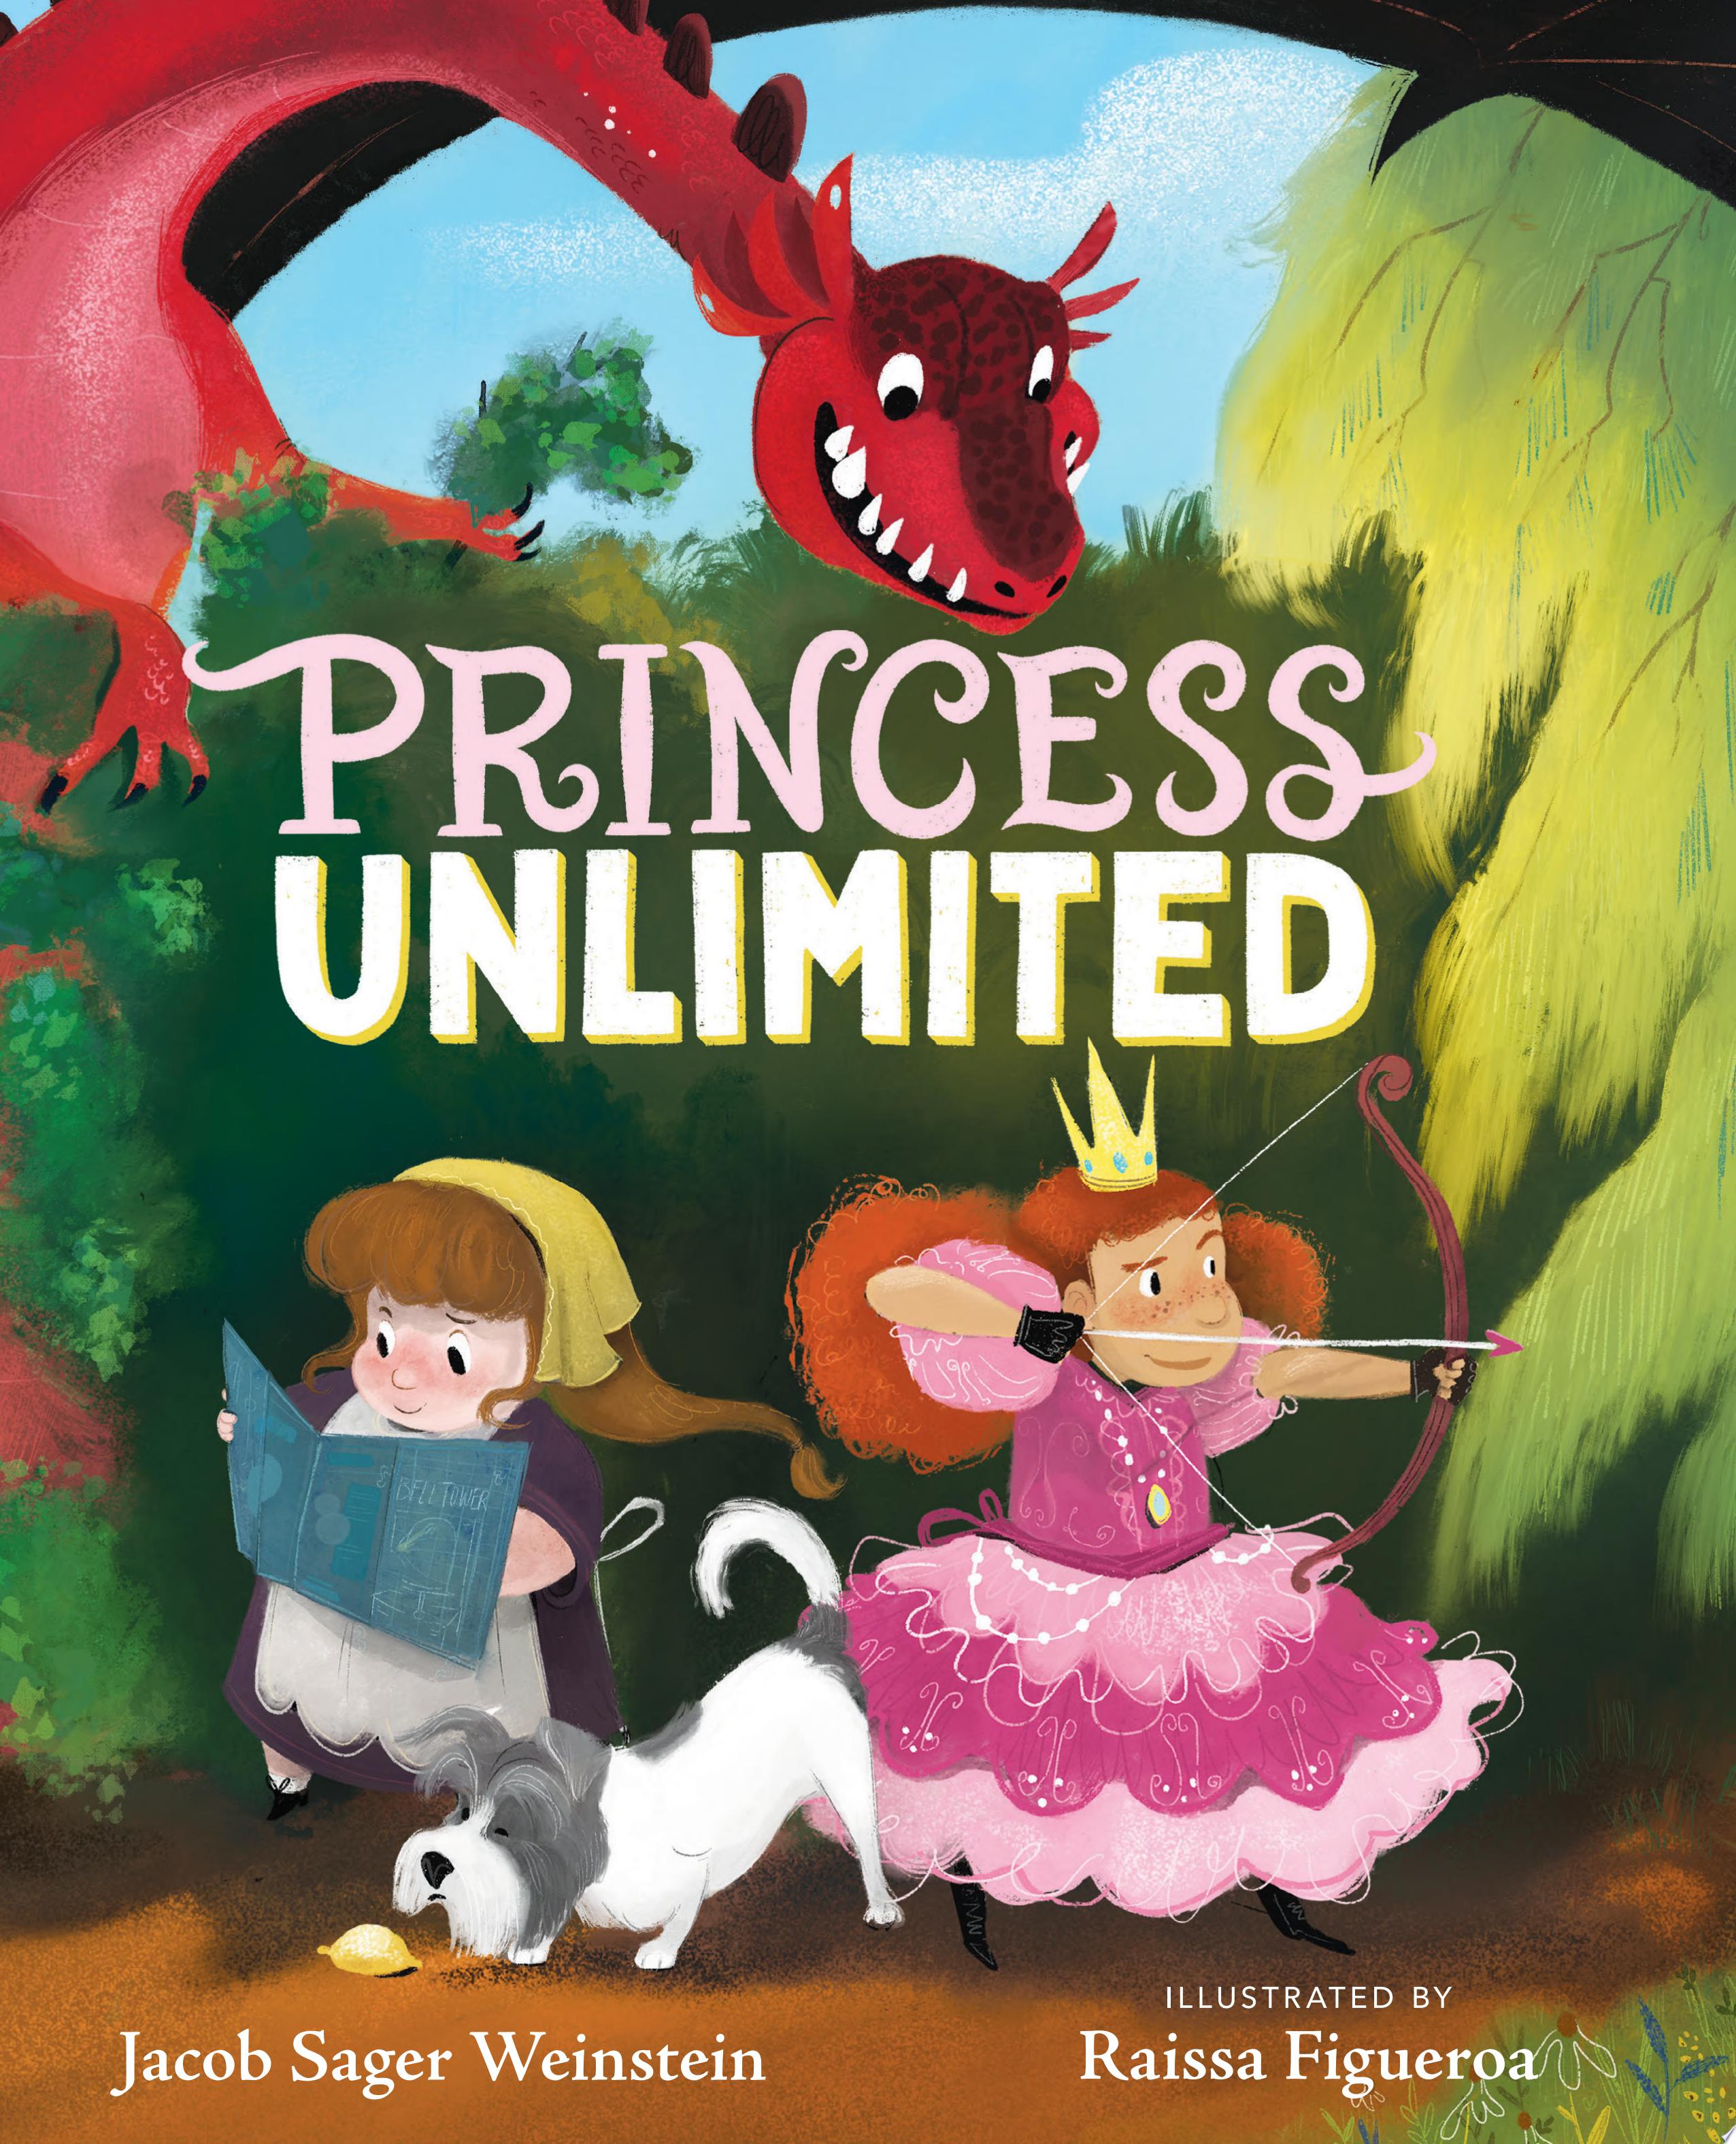 Image for "Princess Unlimited"